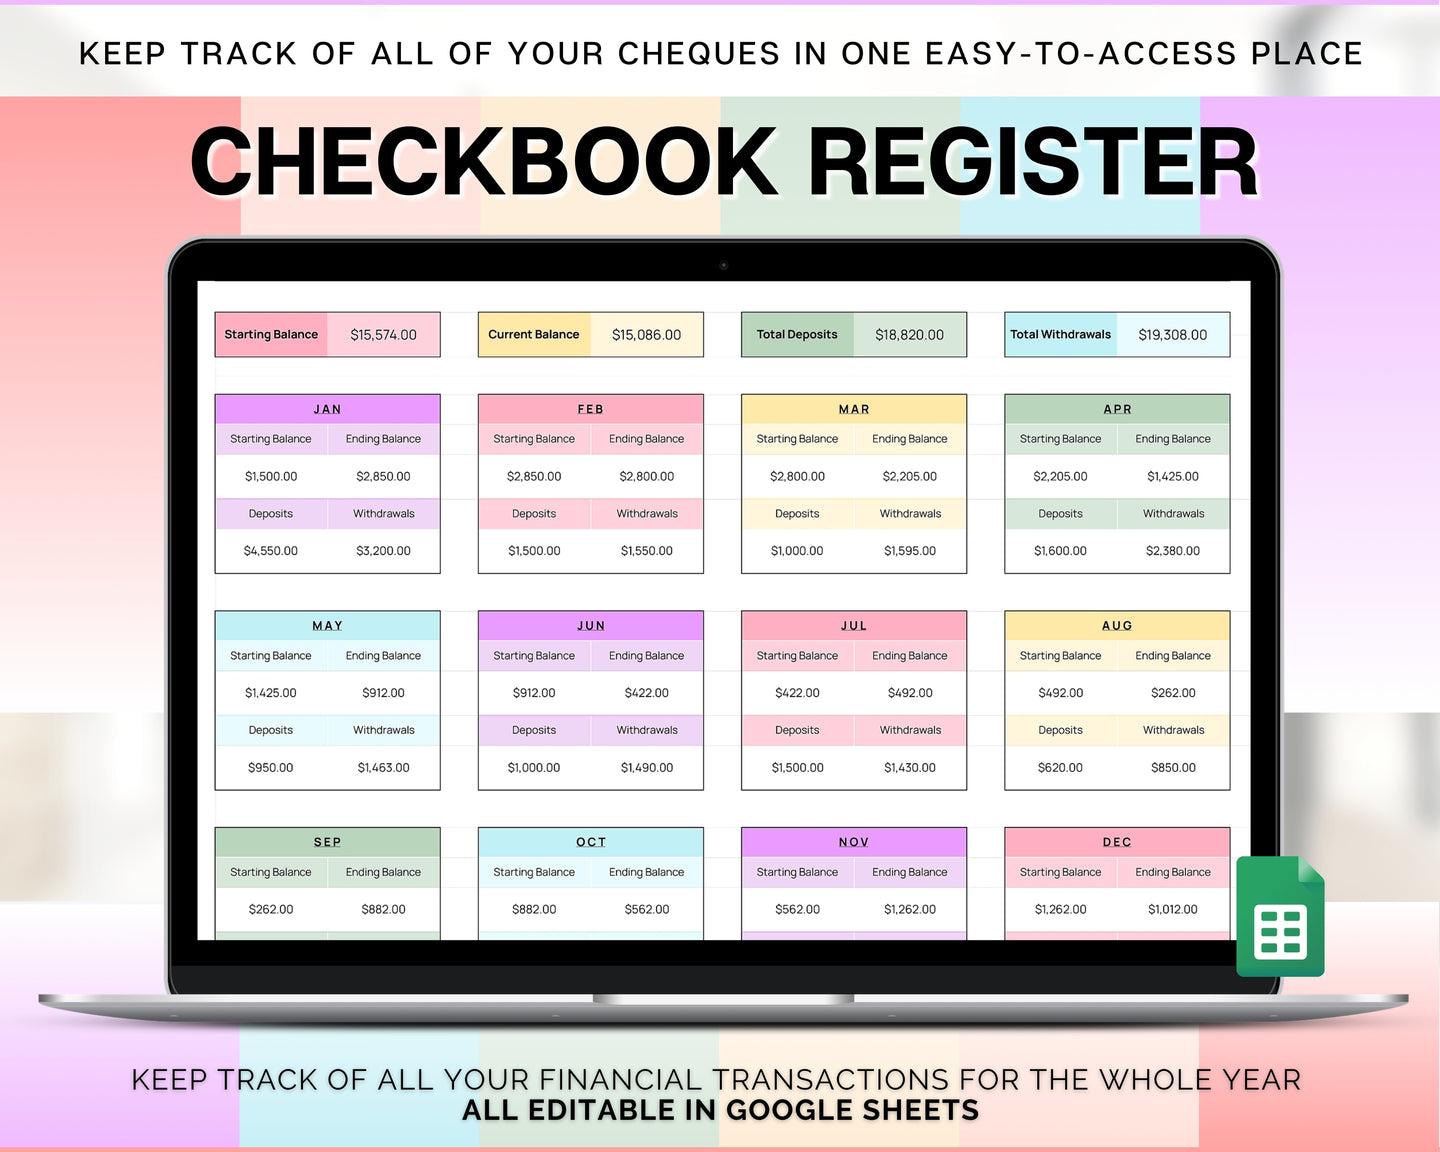 Checkbook Register Spreadsheet | Google Sheets Check Register with Bill, Expenses, Credit Card, Income, Spending Tracker & Finance Template